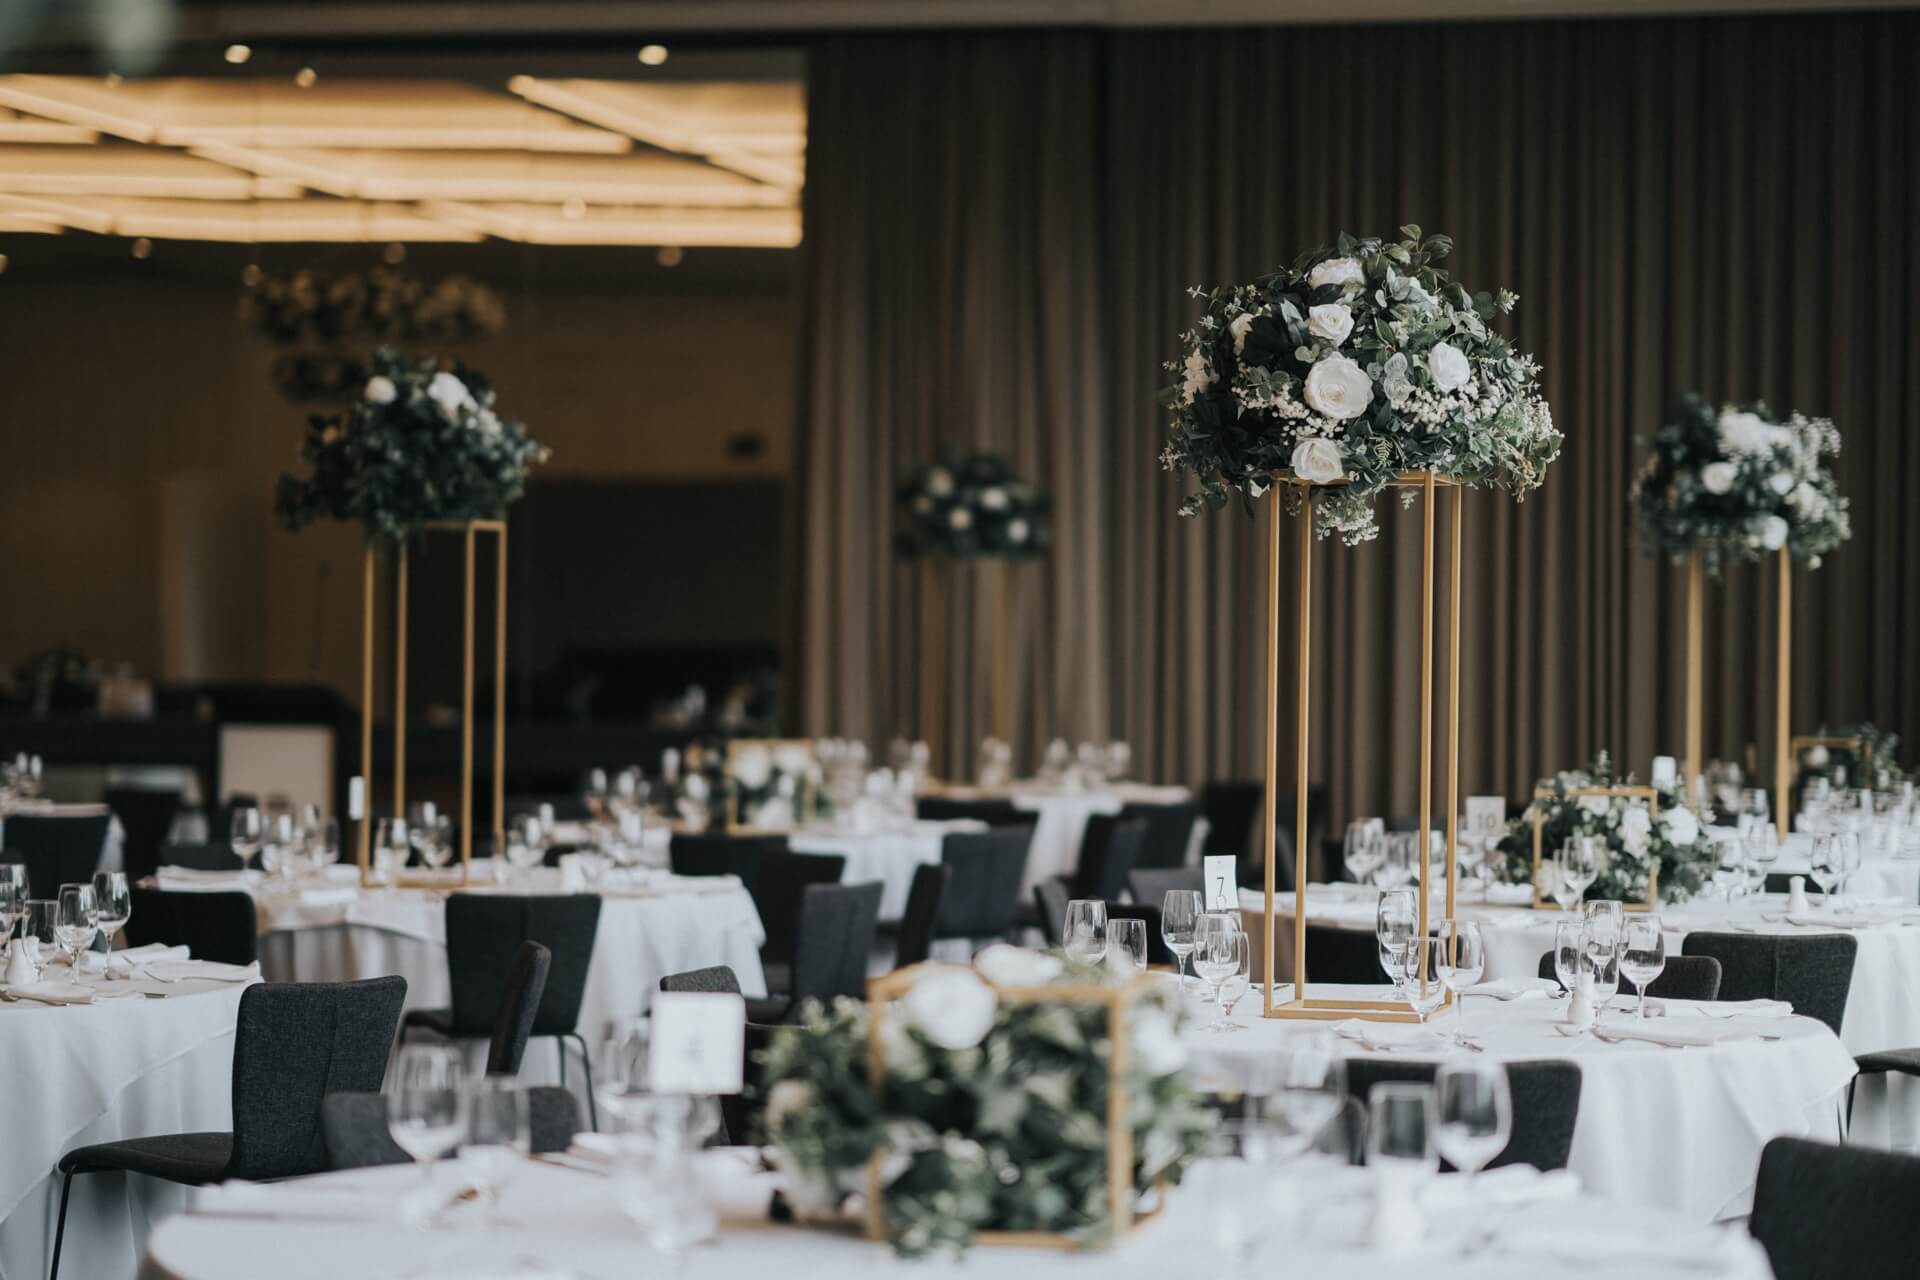 A beautifully decorated wedding reception at Leonda By The Yarra Ballroom, with tables and chairs arranged for guests.